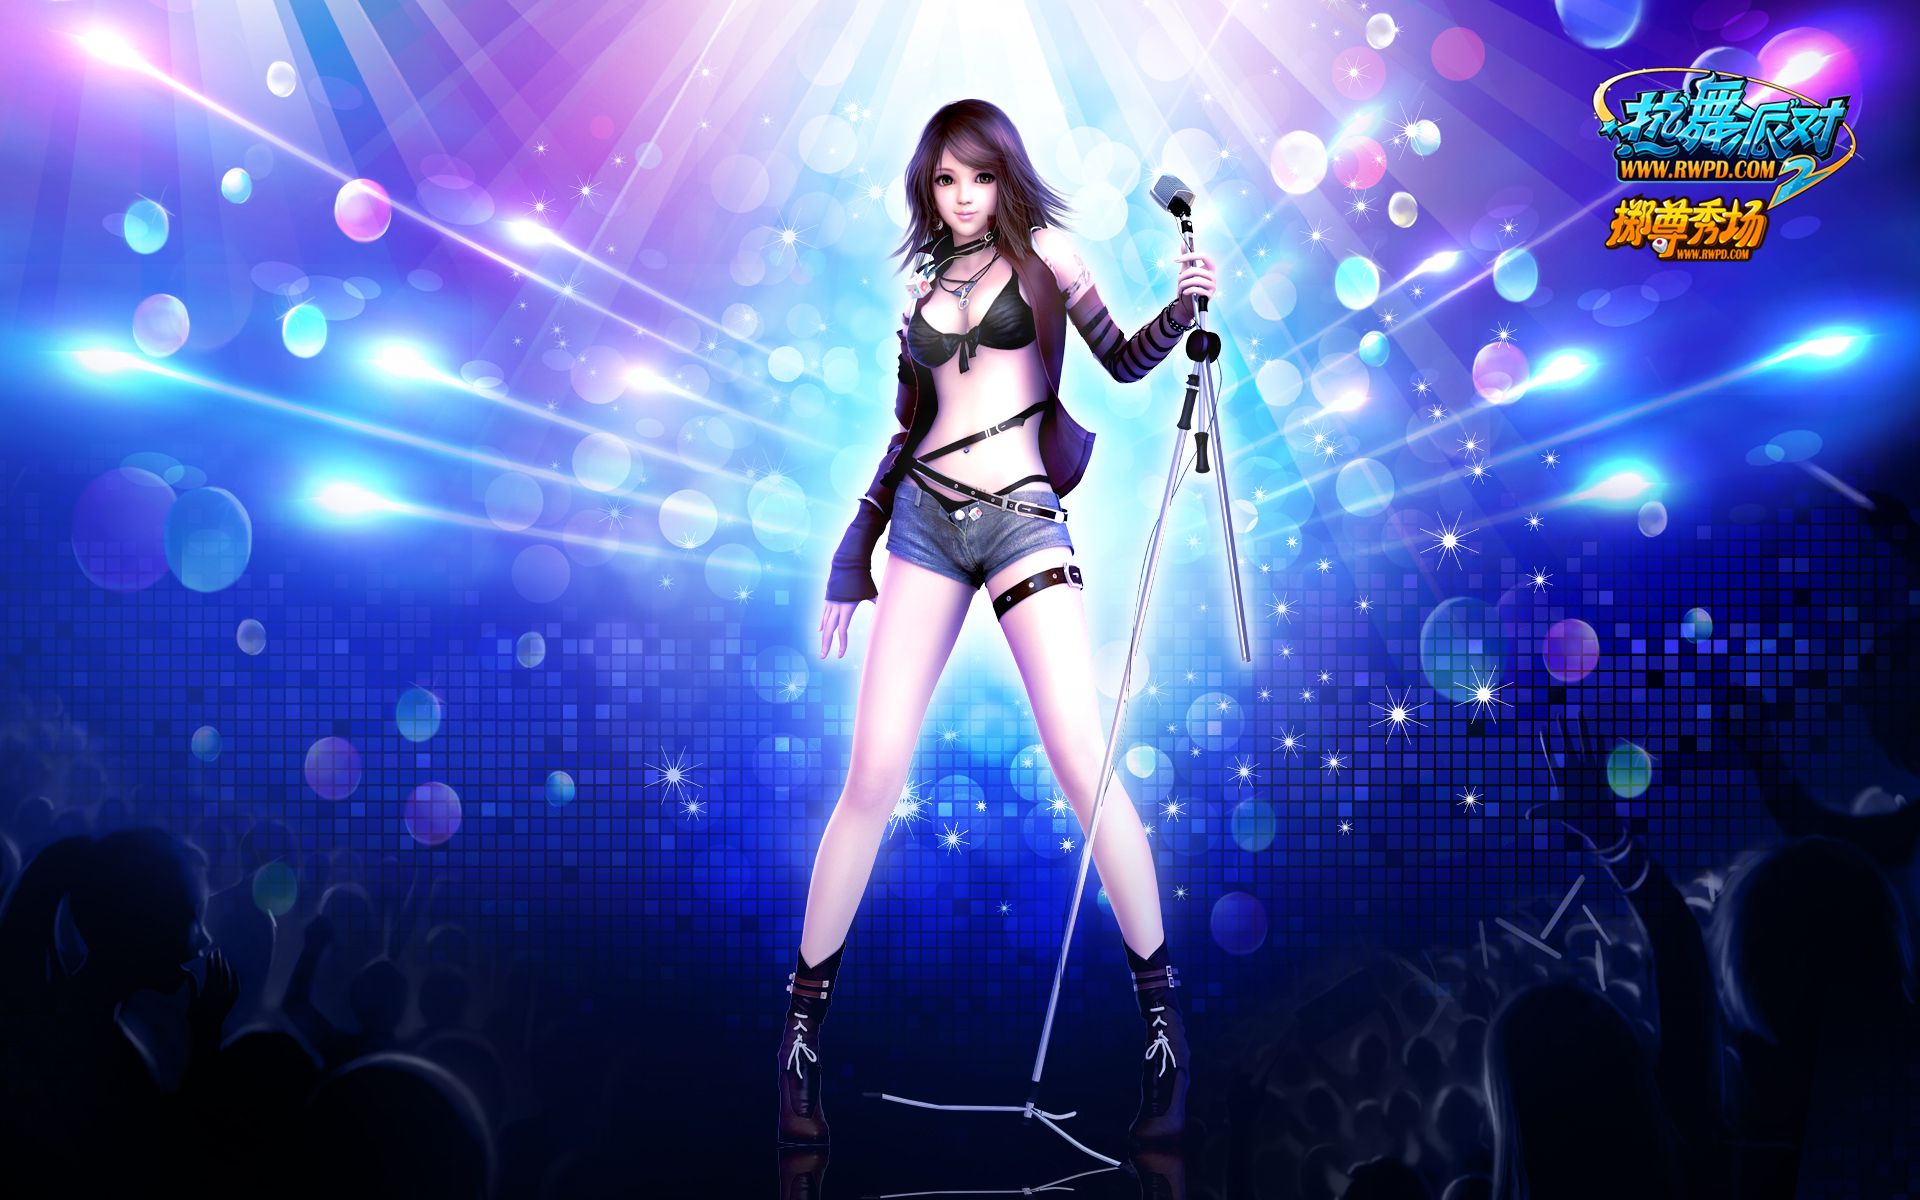 Anime Dance Wallpapers Wallpaper Cave 4015